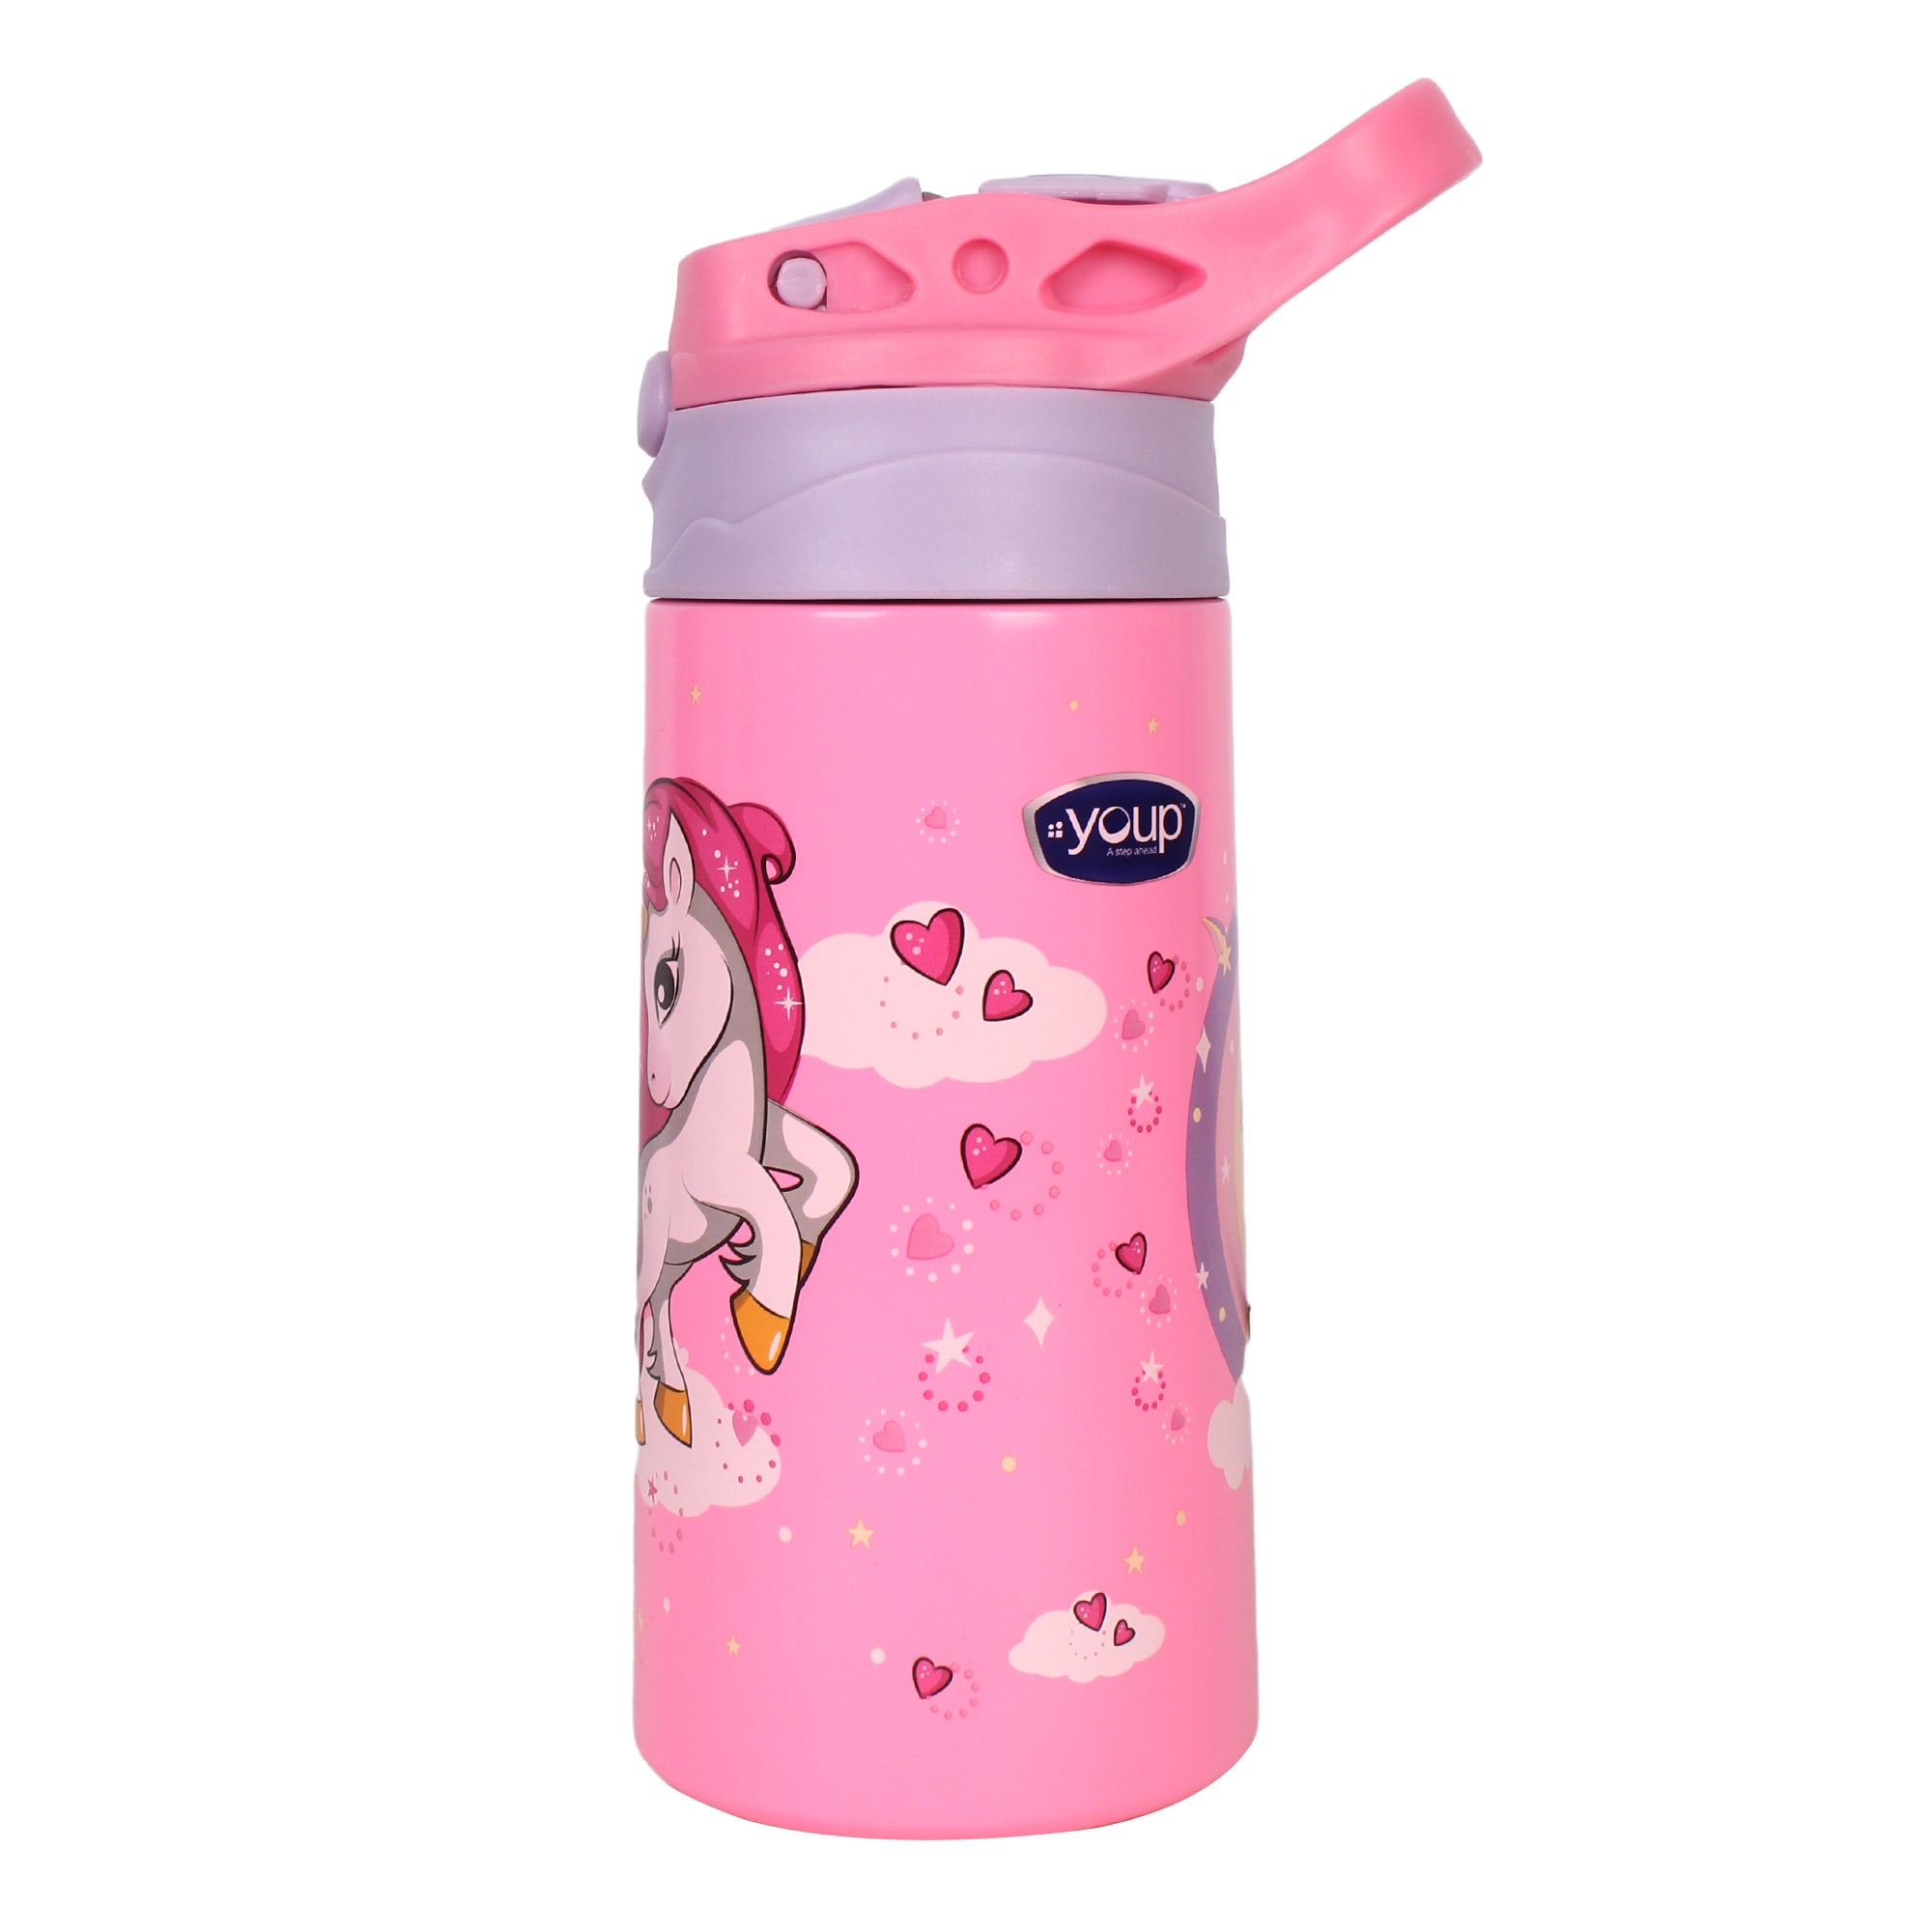 Youp Stainless Steel Insulated Pink Color Unicorn Theme Kids Anti-Dust Sipper Bottle TINKLER - 400 ml